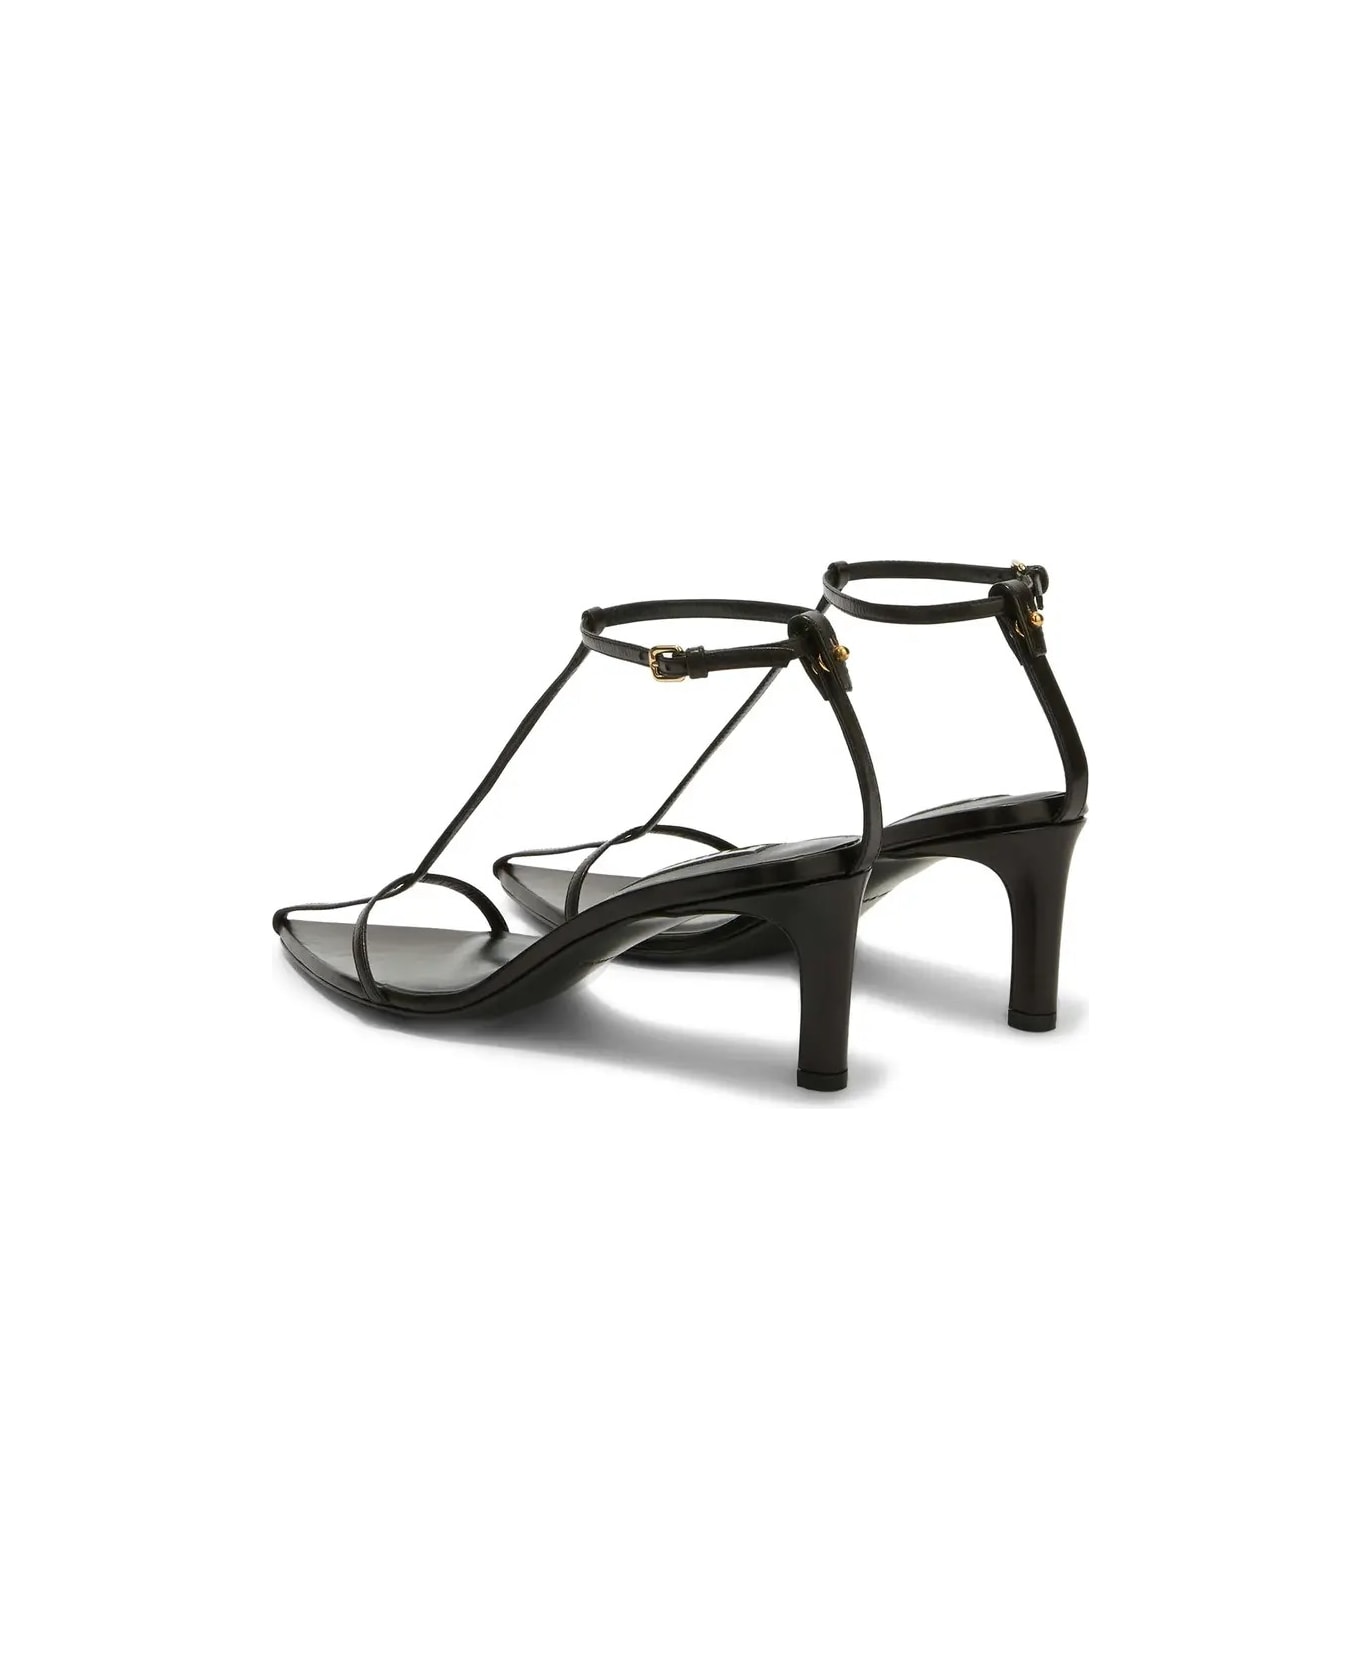 Jil Sander Black Leather Pointed Sandals With Straps - Black サンダル